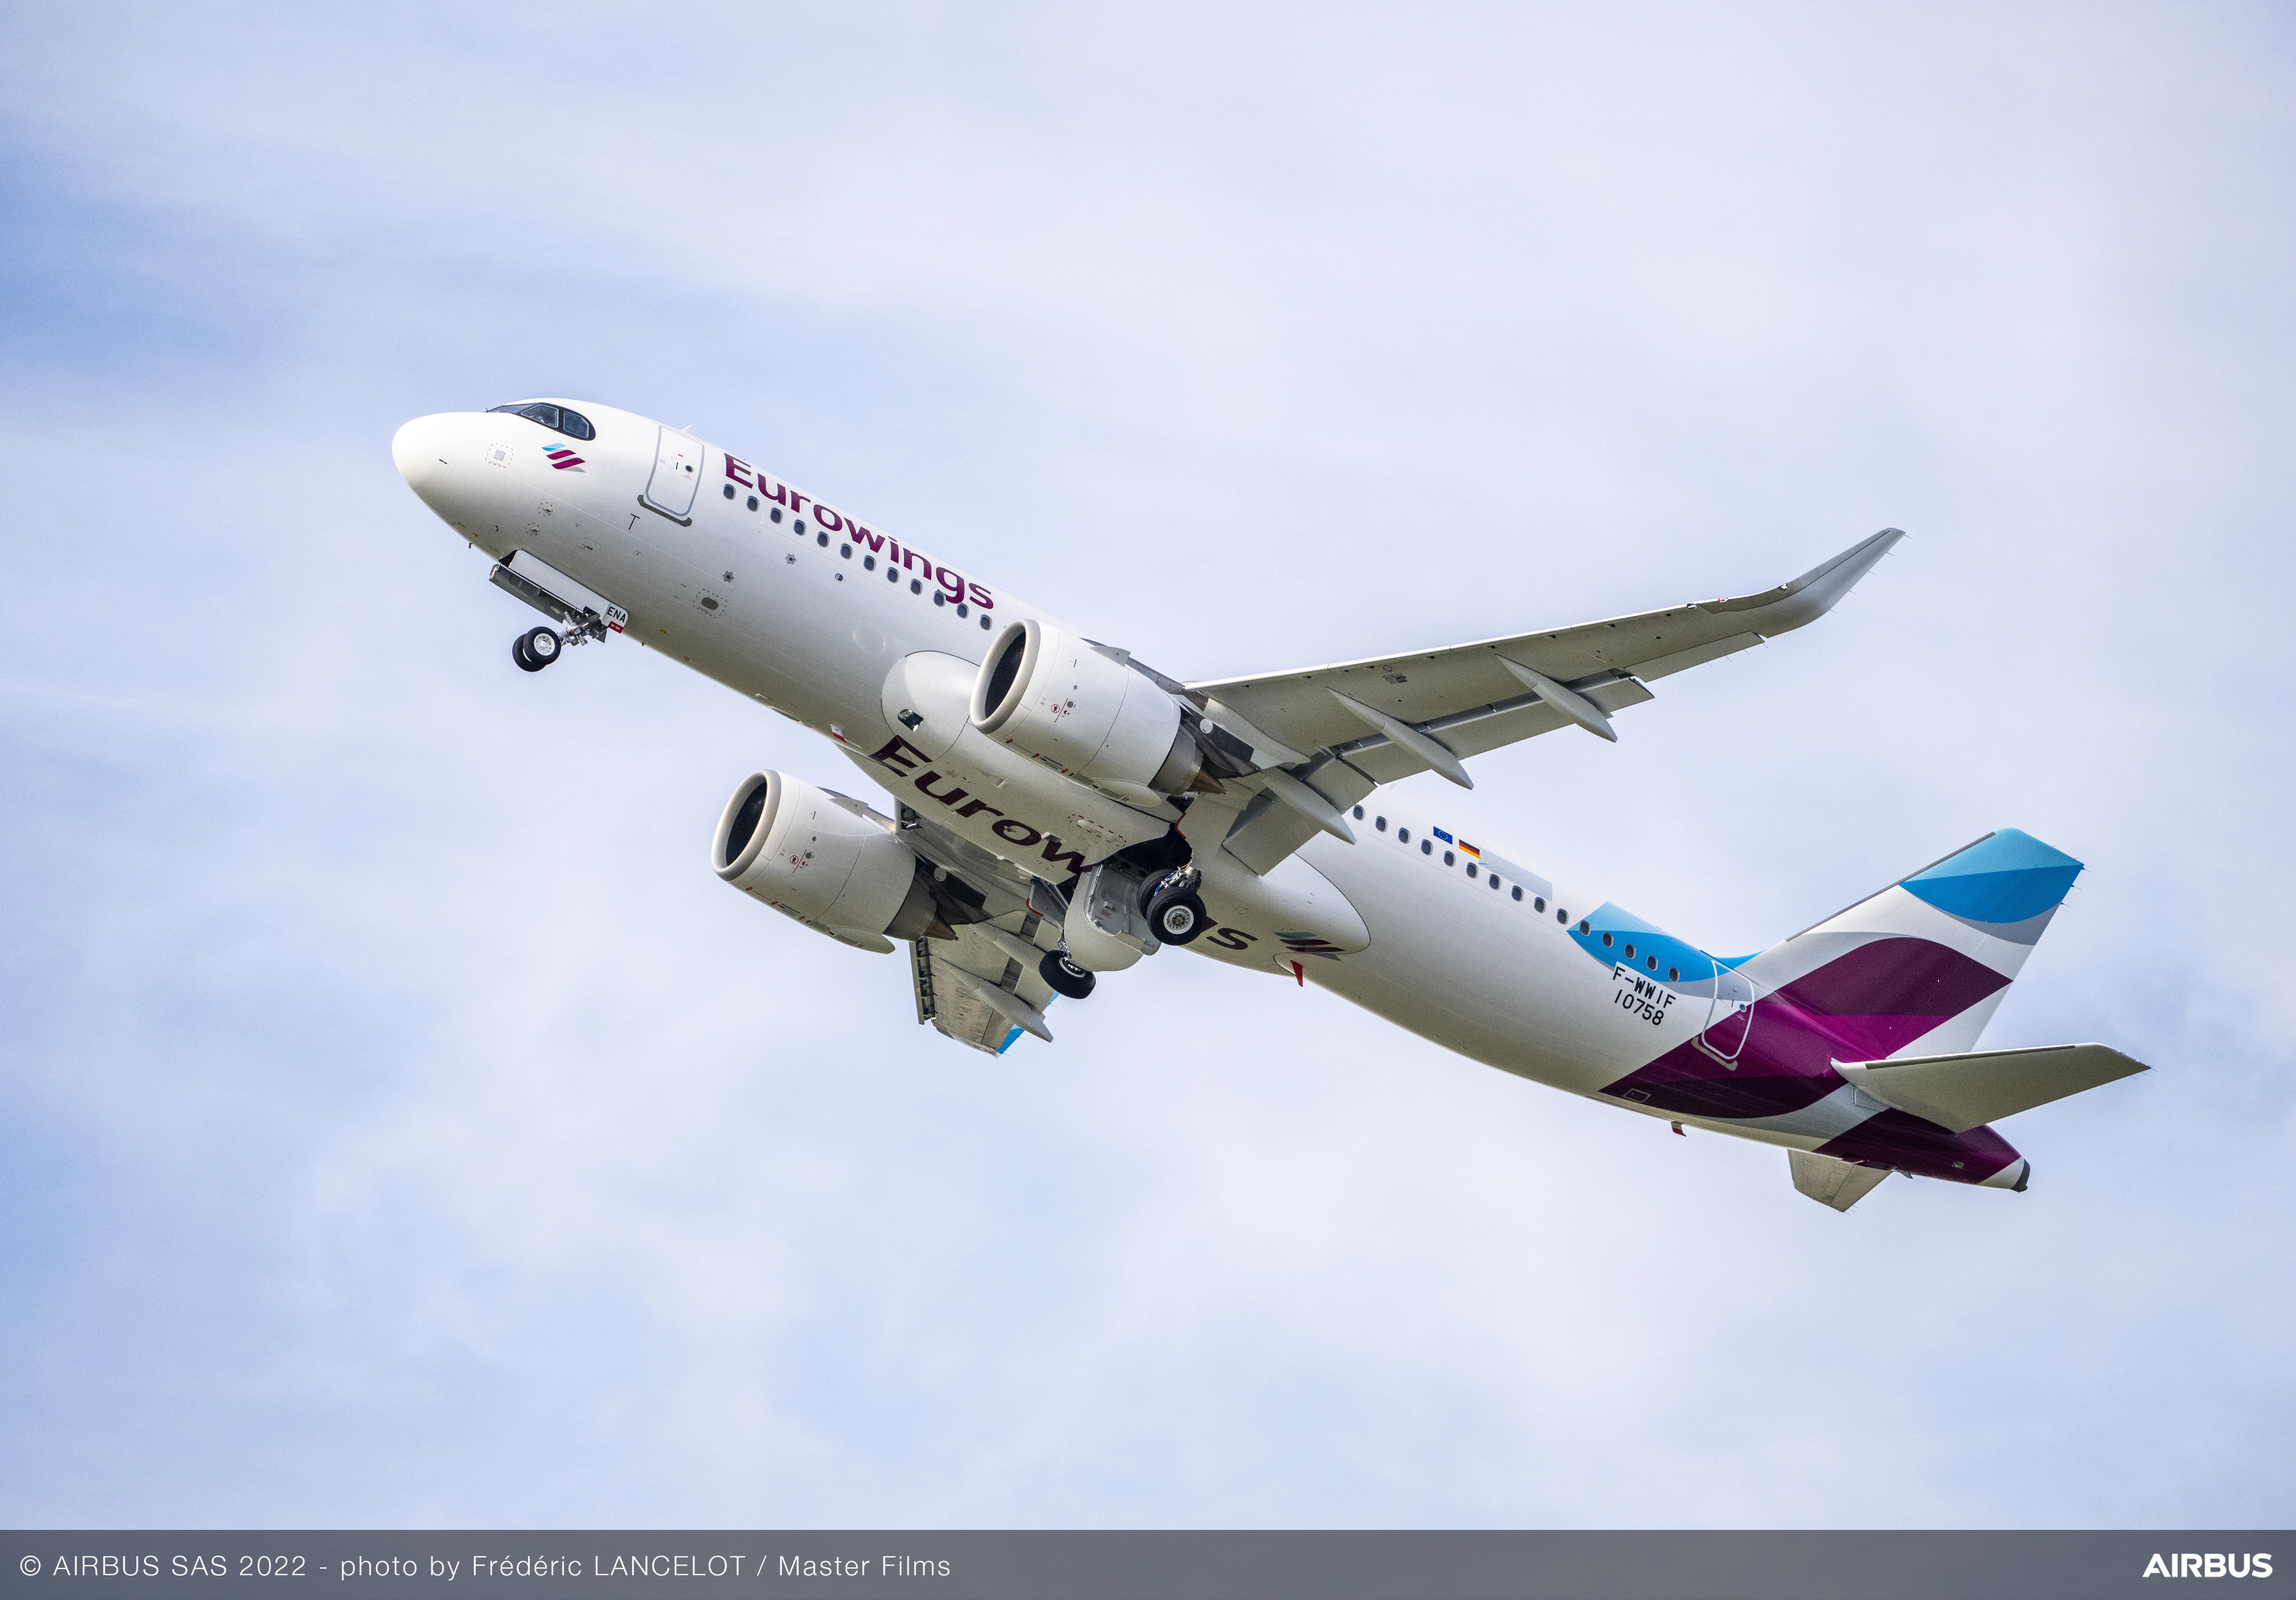 Eurowings receives its first A320neo